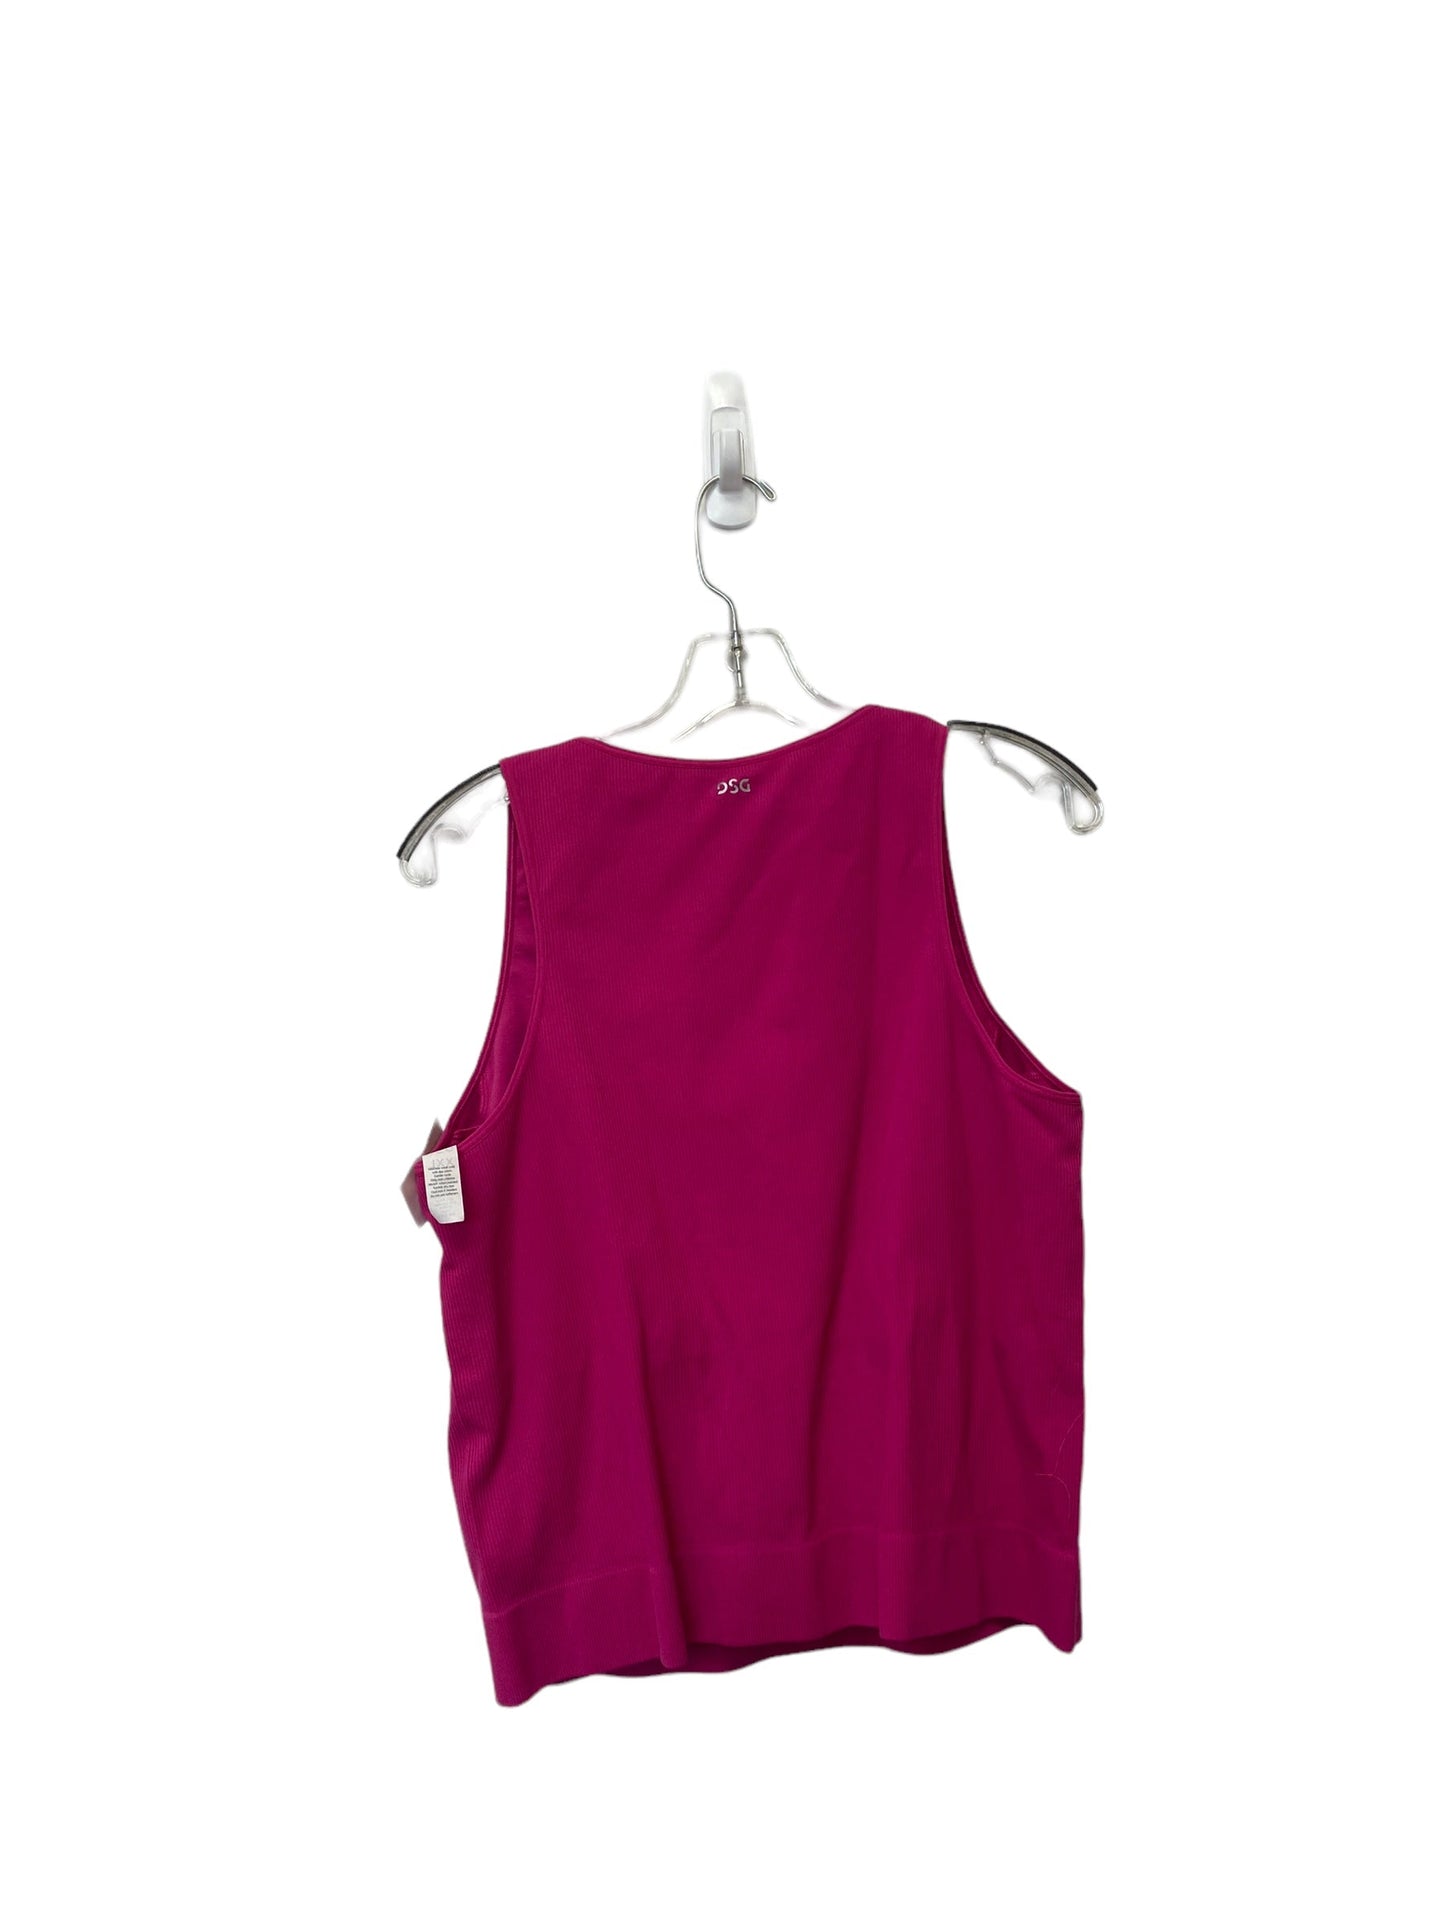 Top Sleeveless By Dsg Outerwear  Size: Xxl